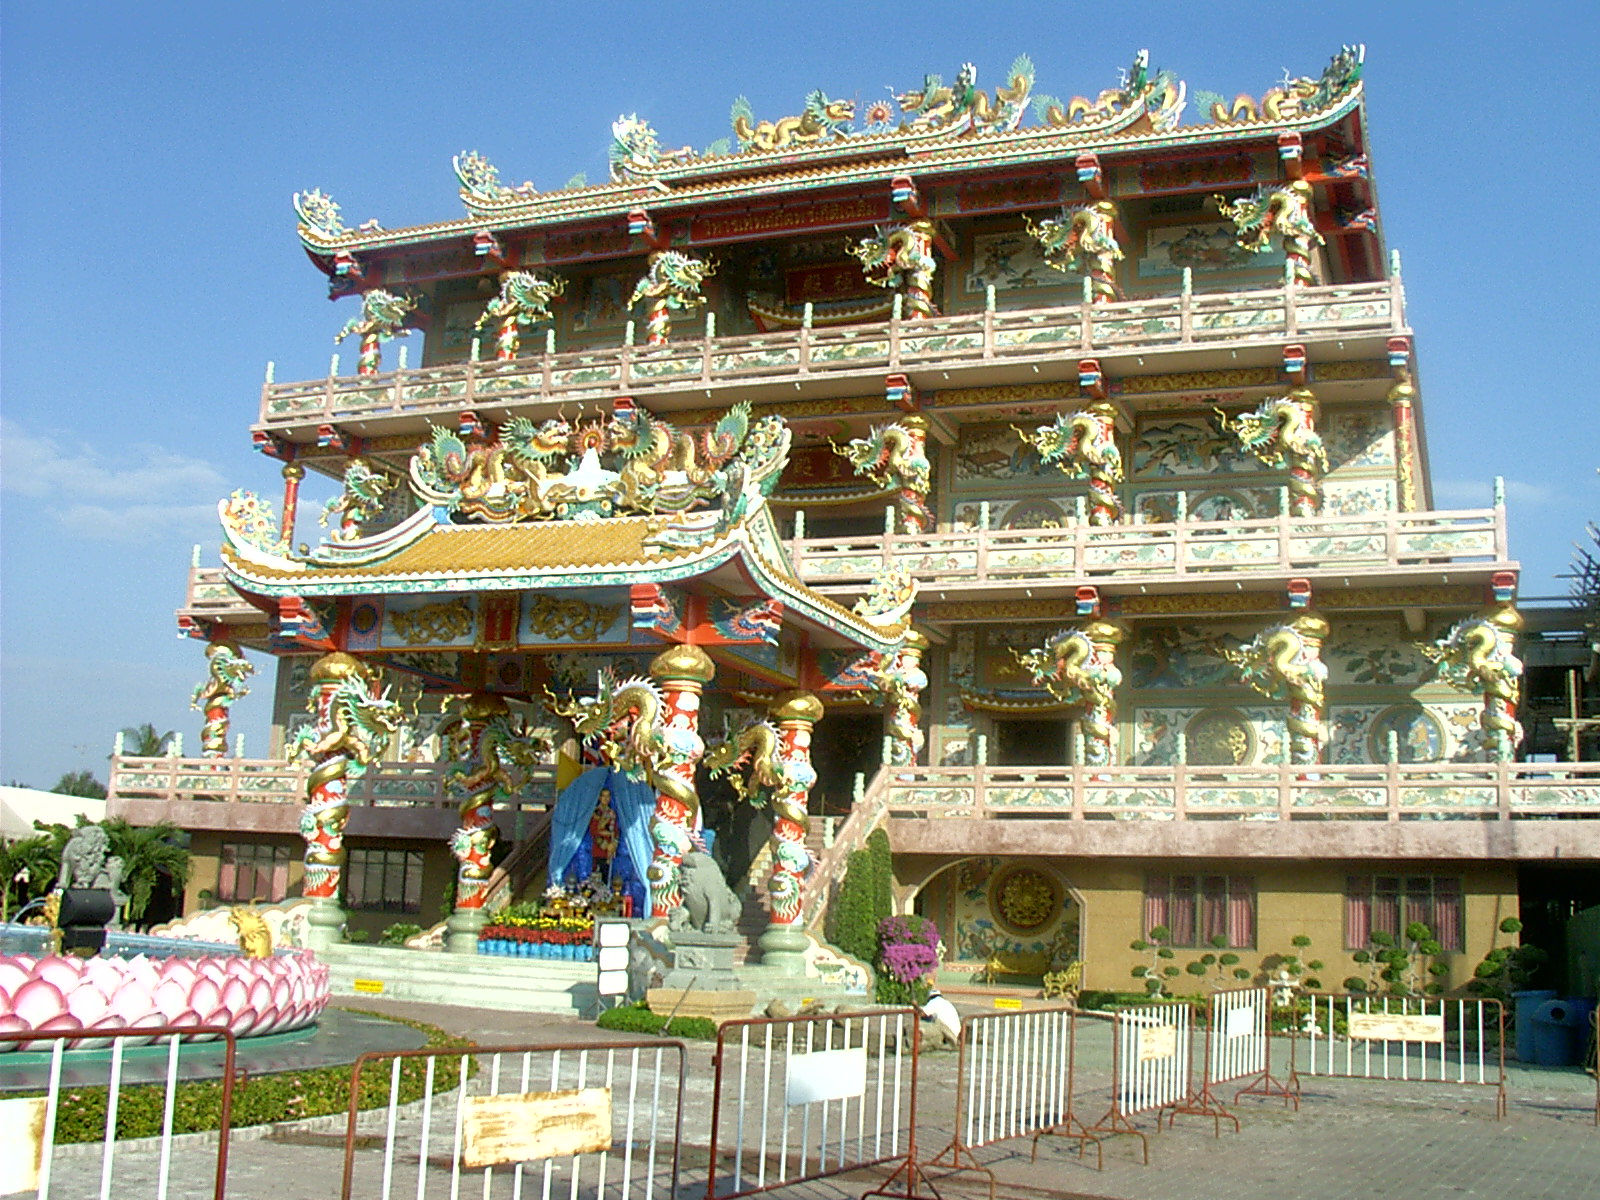 The Chinese Temple we visited just outside Chonburi